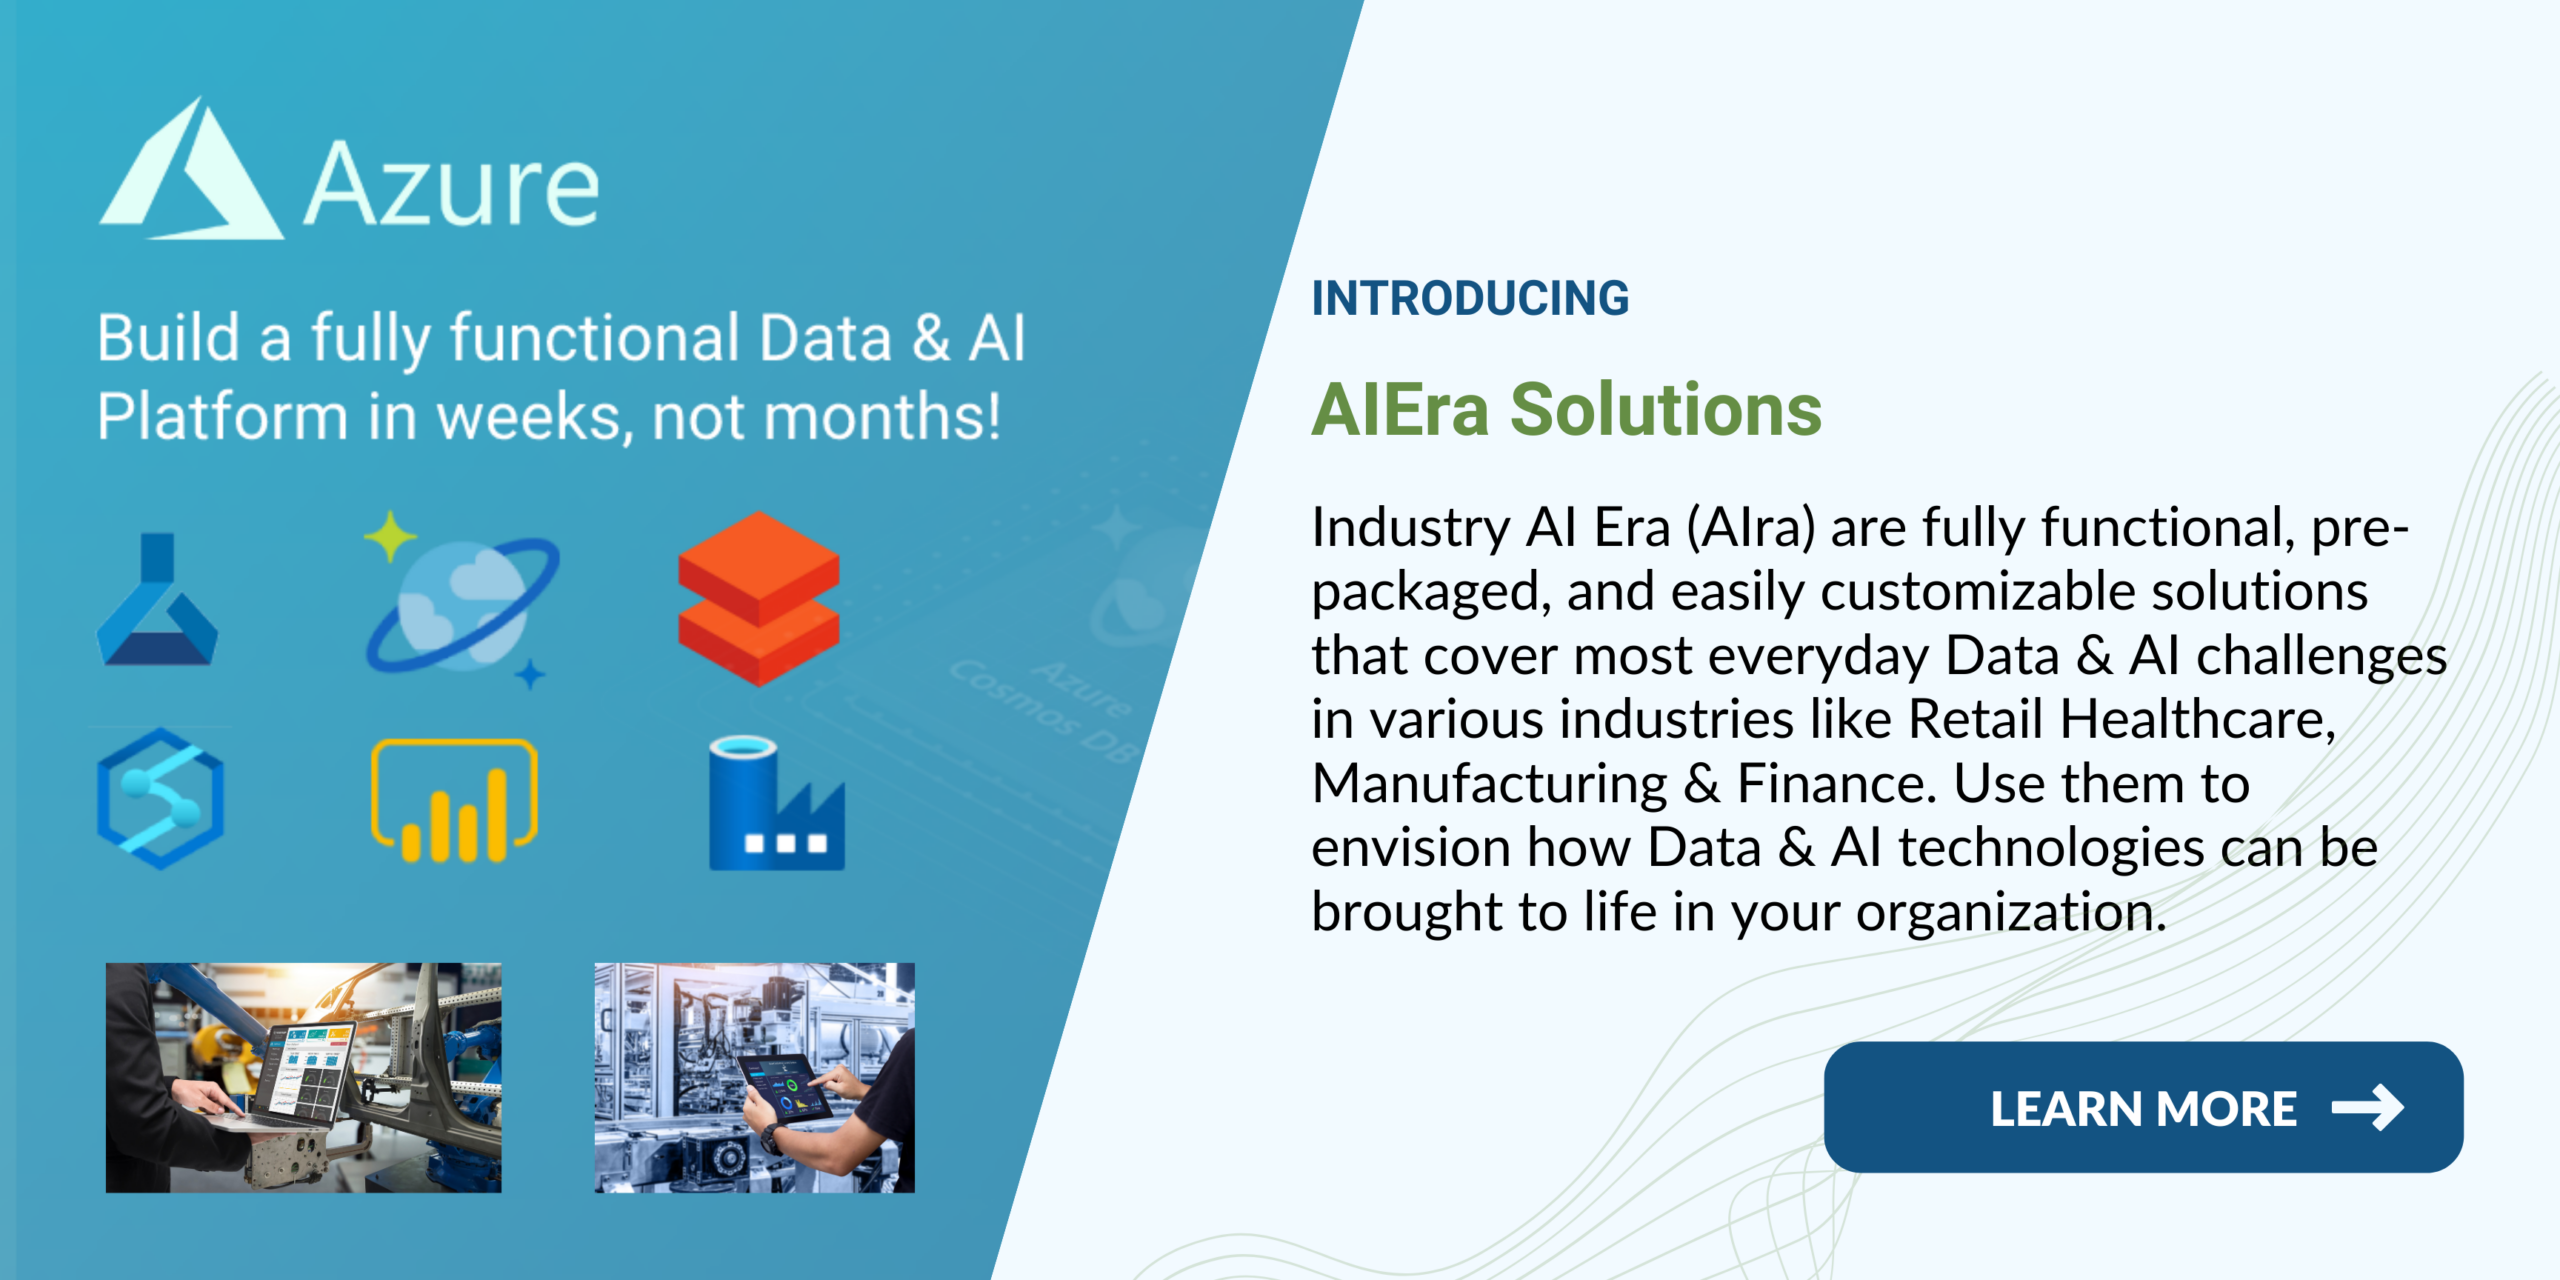 AIra Solutions